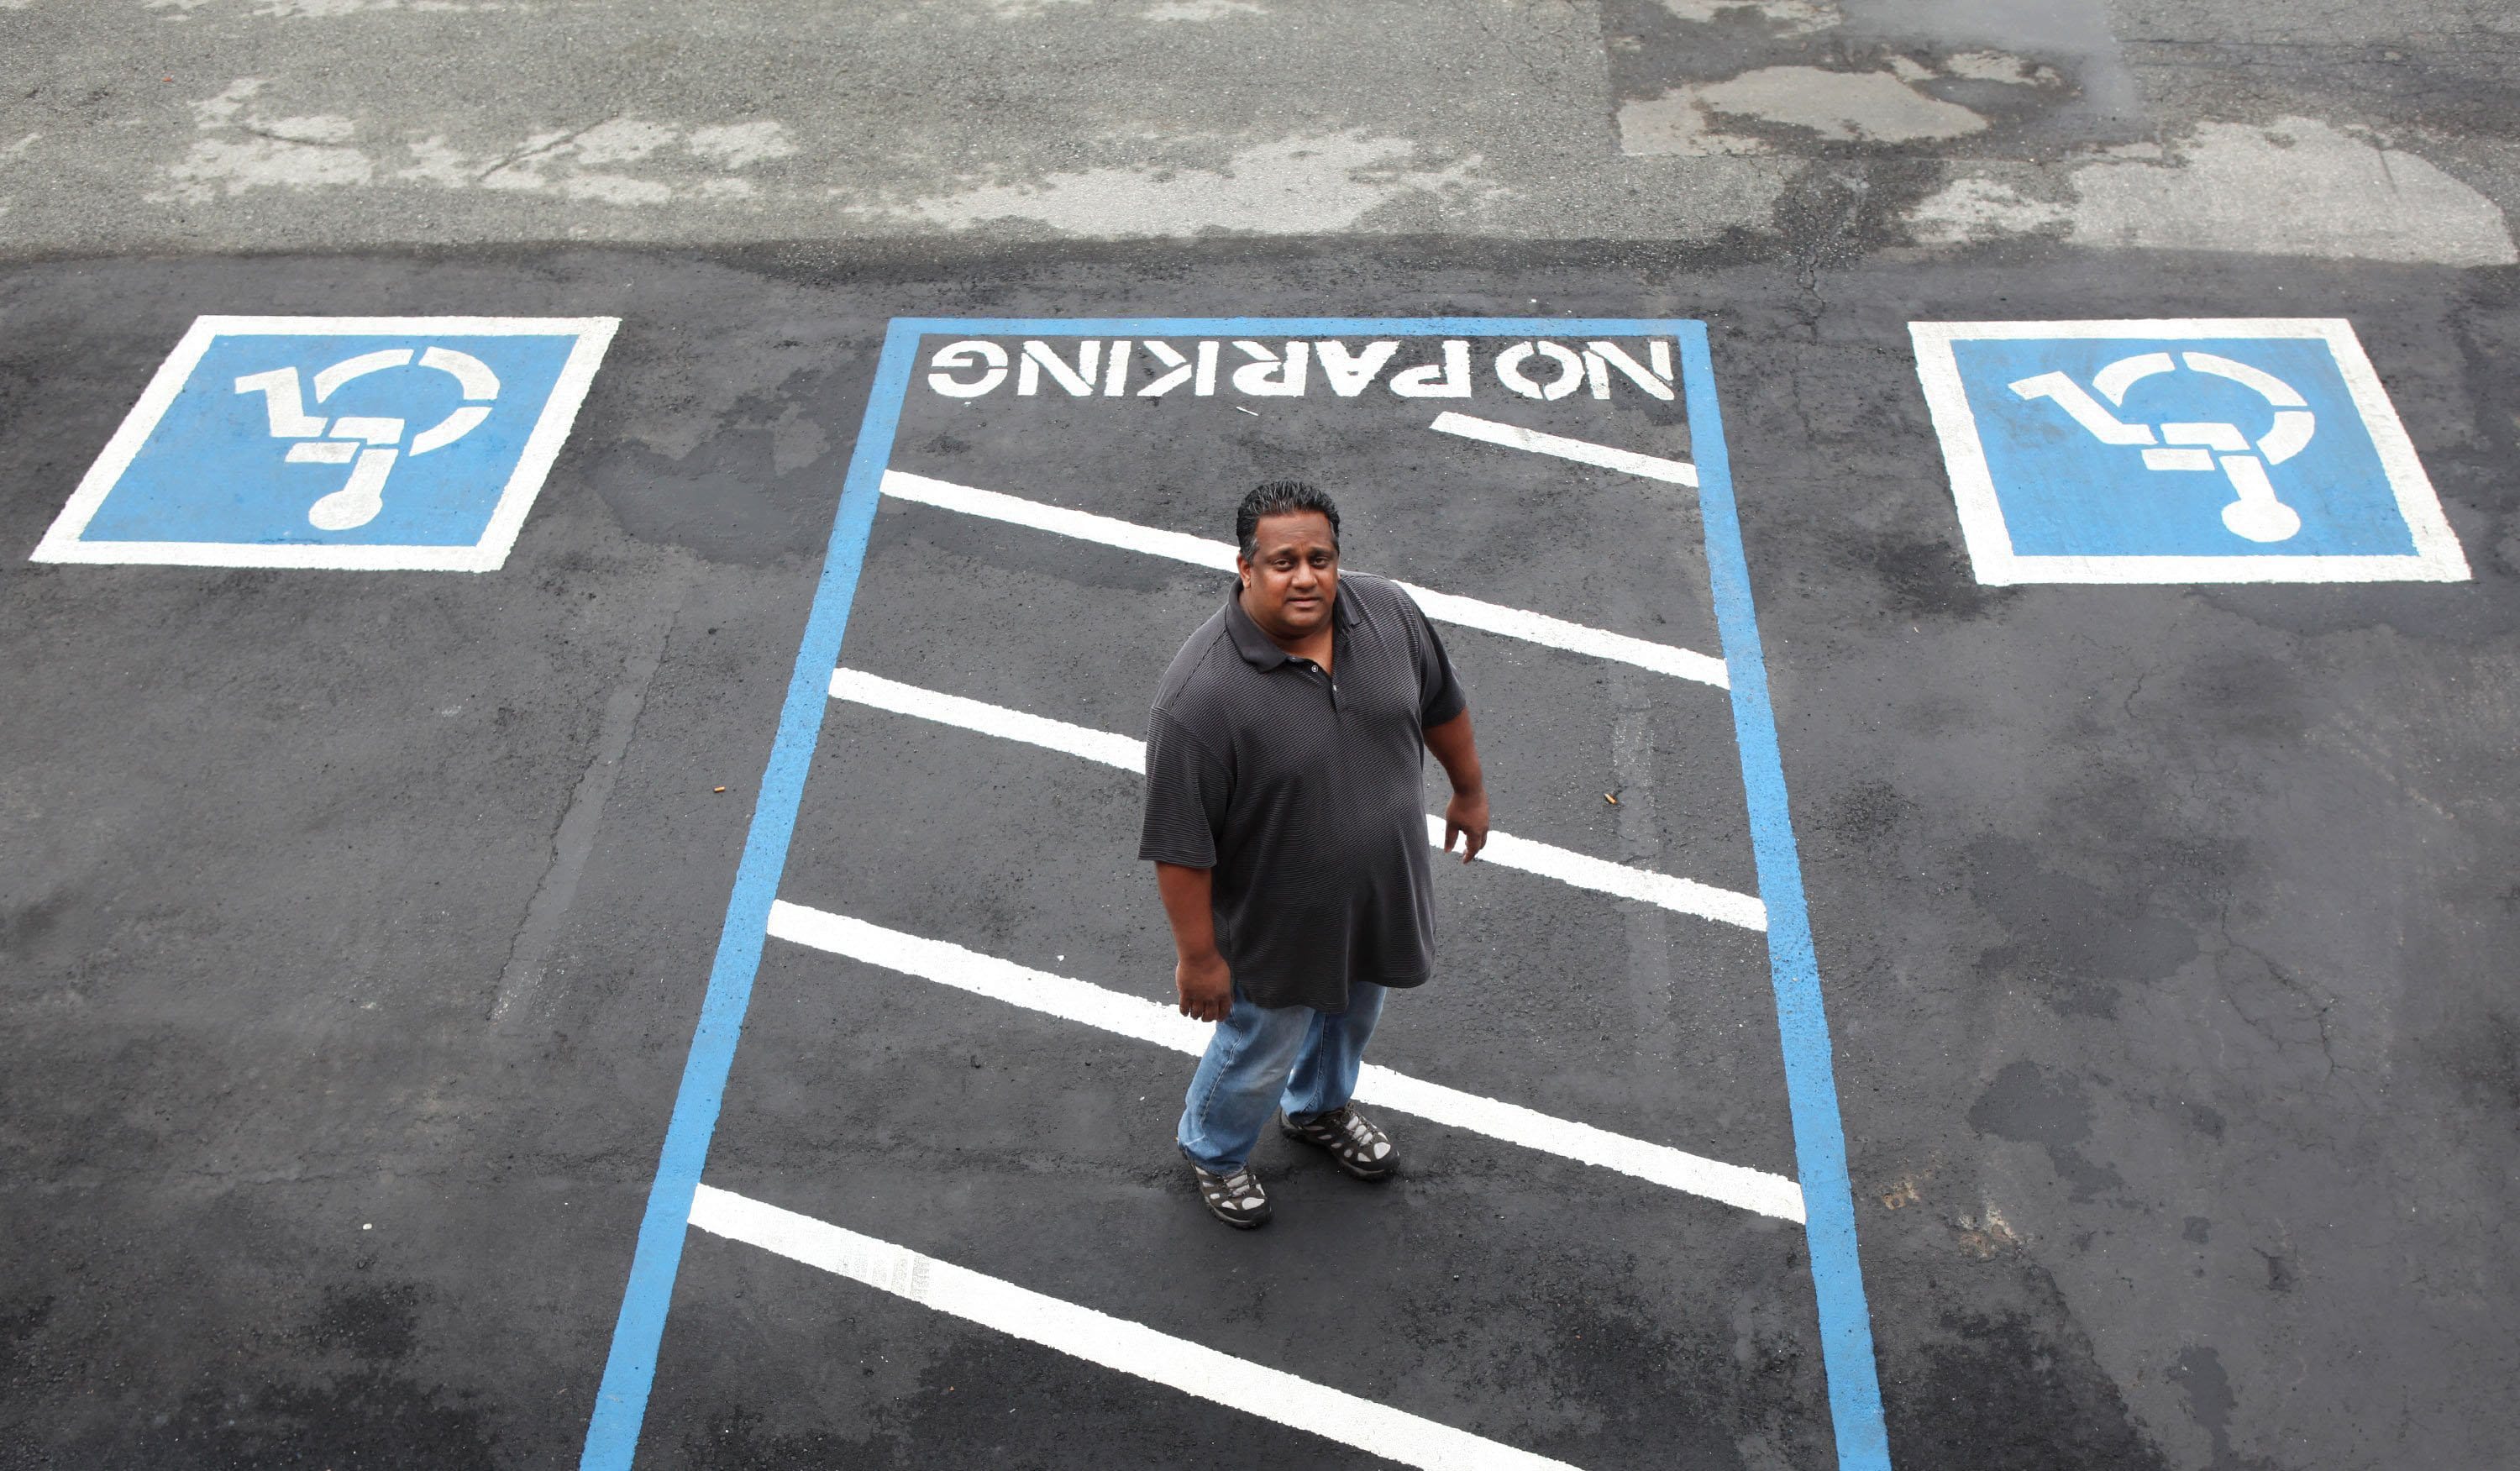 Vikas Patel, owner of the EconoLodge in Santa Clara, Calif., shows the handicapped parking he added after being sued for alleged ADA violations.